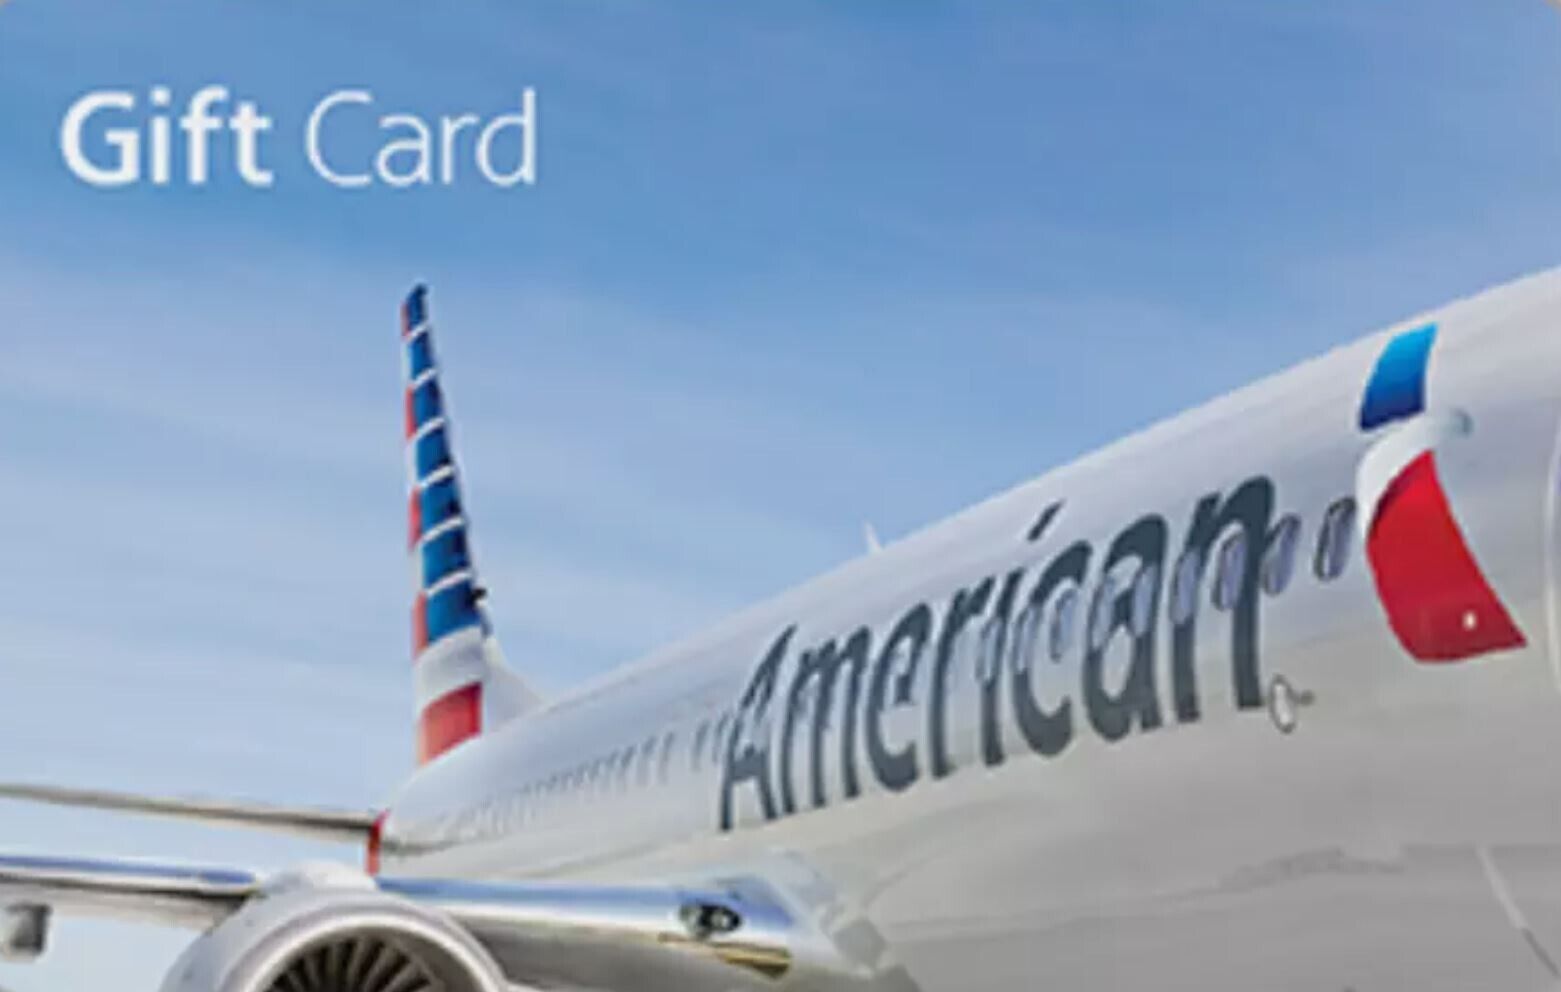 American Airlines Gift Card - Trip Credits $440+, expires 05/2025.